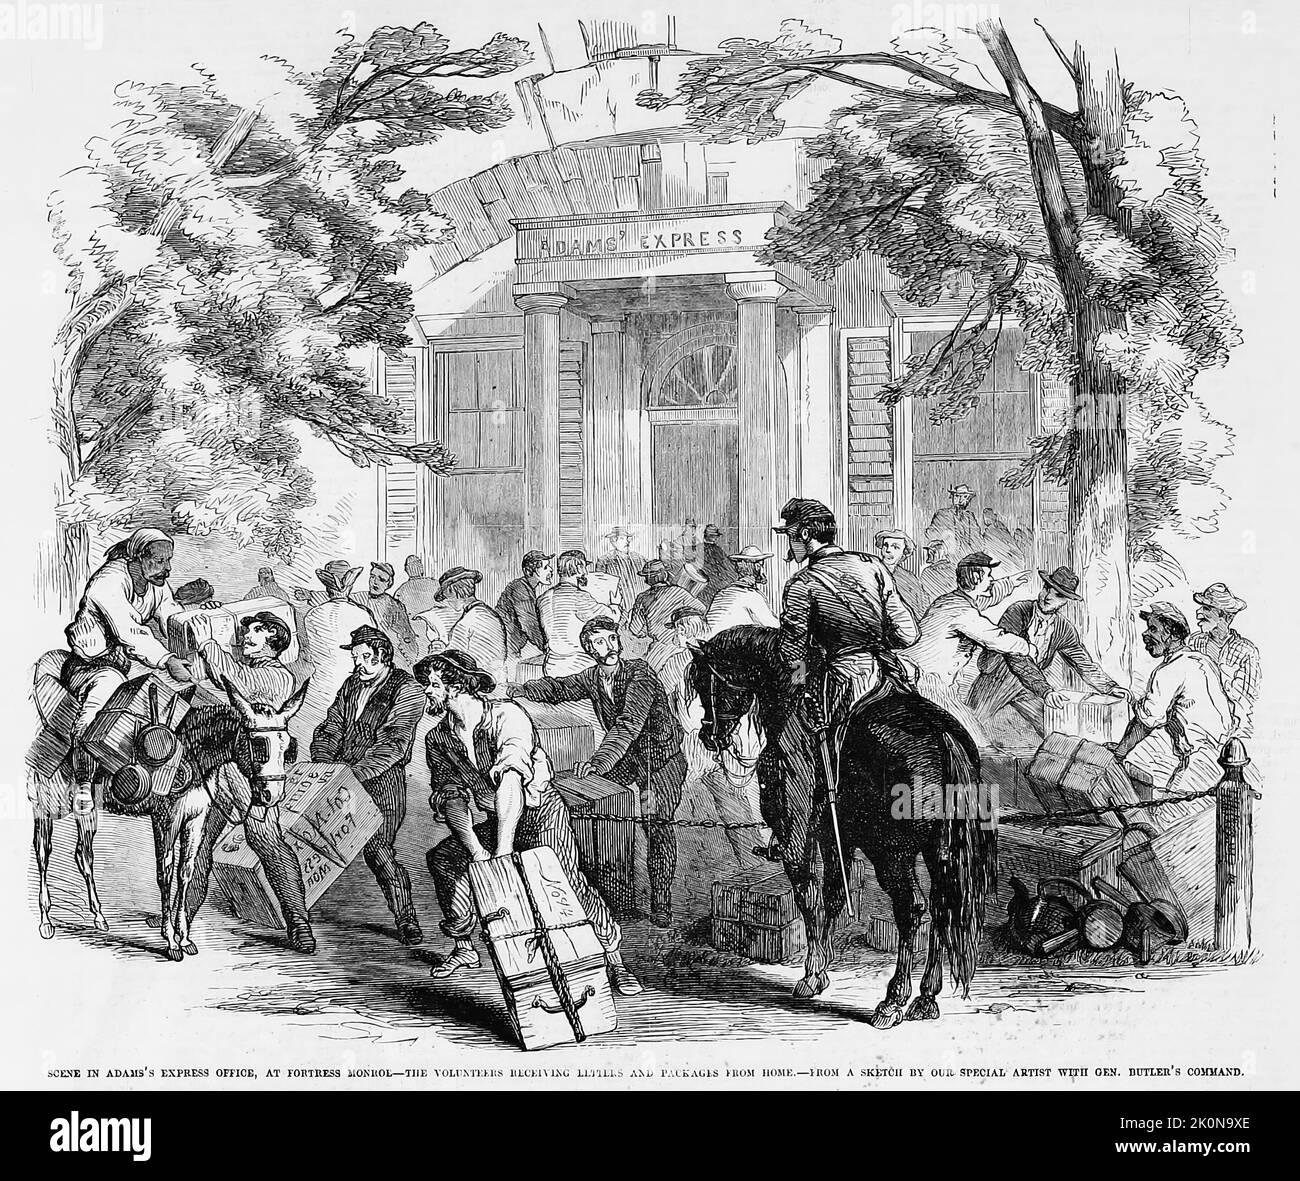 Scene in Adams' Express Office, at Fort Monroe, Virginia - The Volunteers receiving letters and packages from home. August 1861. 19th century American Civil War illustration from Frank Leslie's Illustrated Newspaper Stock Photo